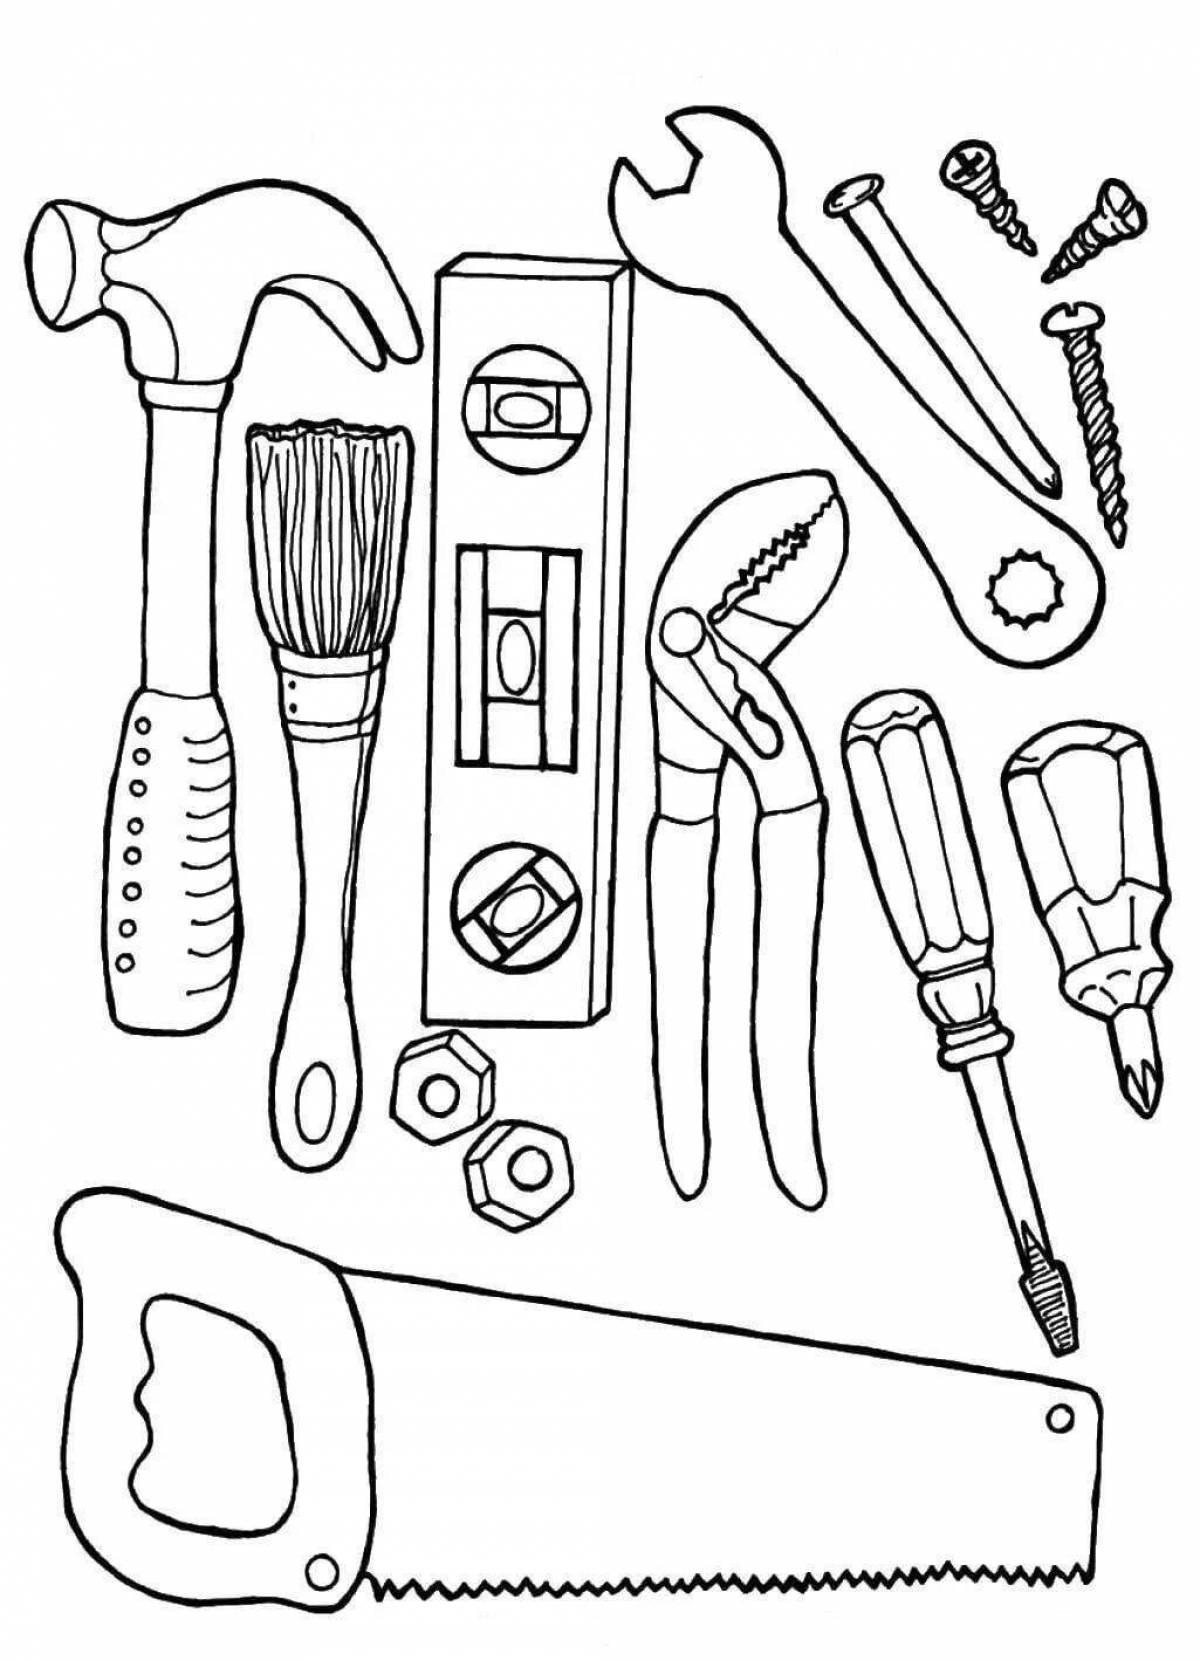 Glamor tools coloring book